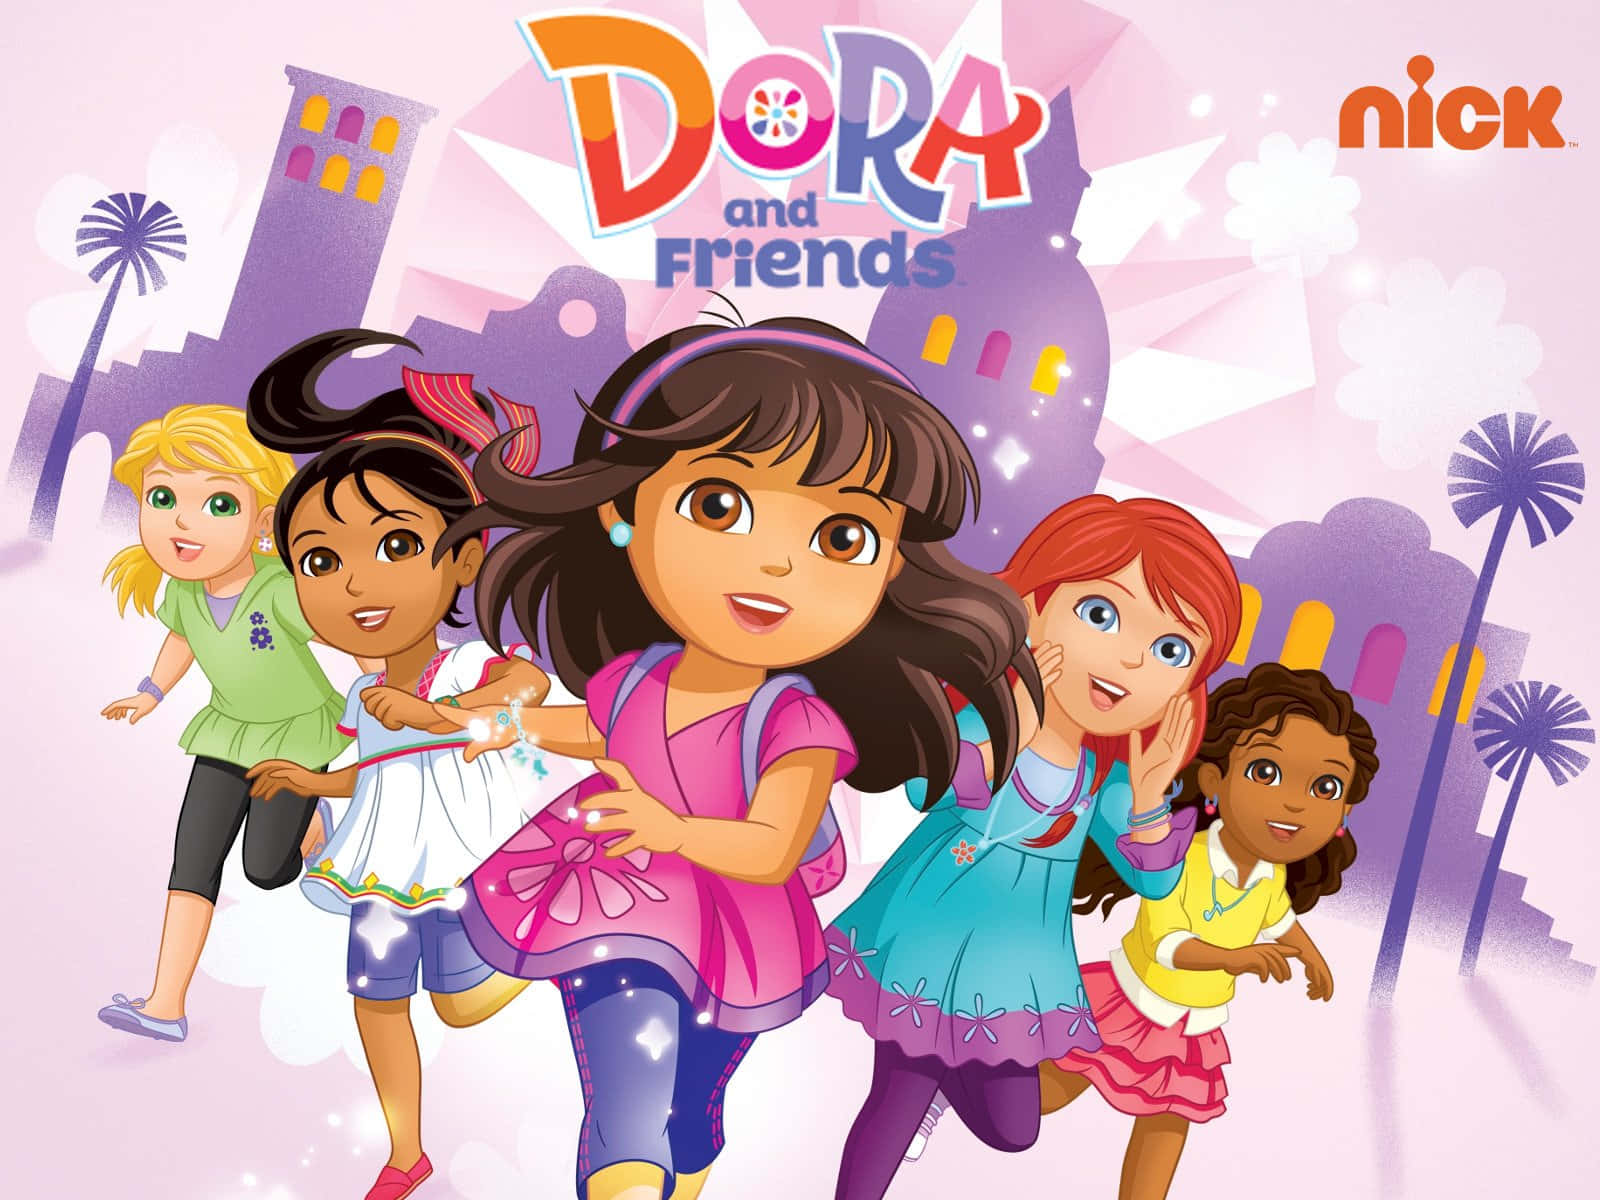 Dora is ready for her next big adventure!